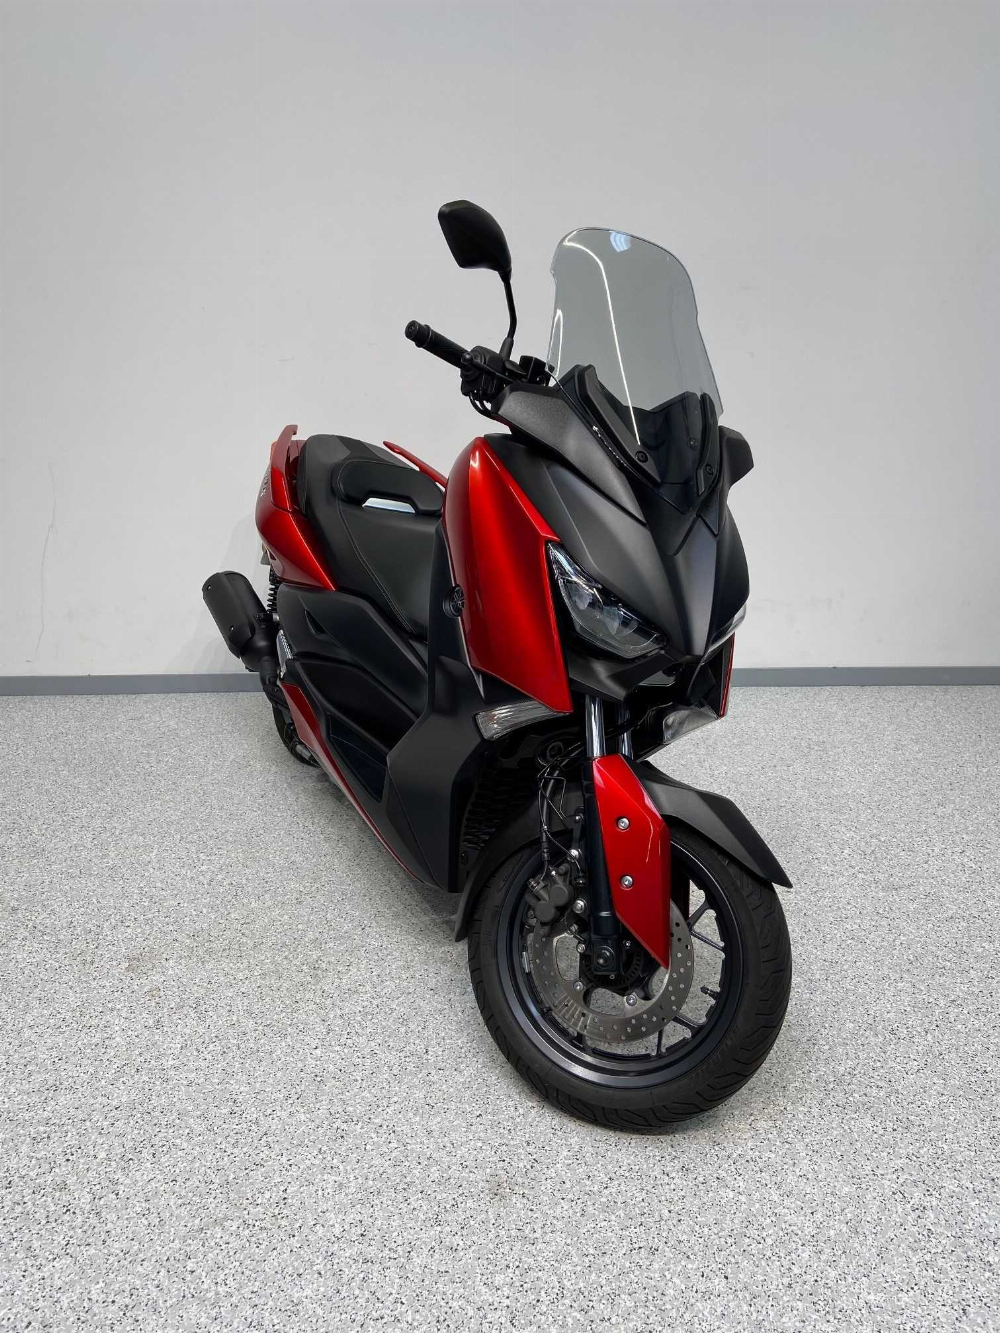 Yamaha YP 125 R X-Max ABS 2018 vue 3/4 droite